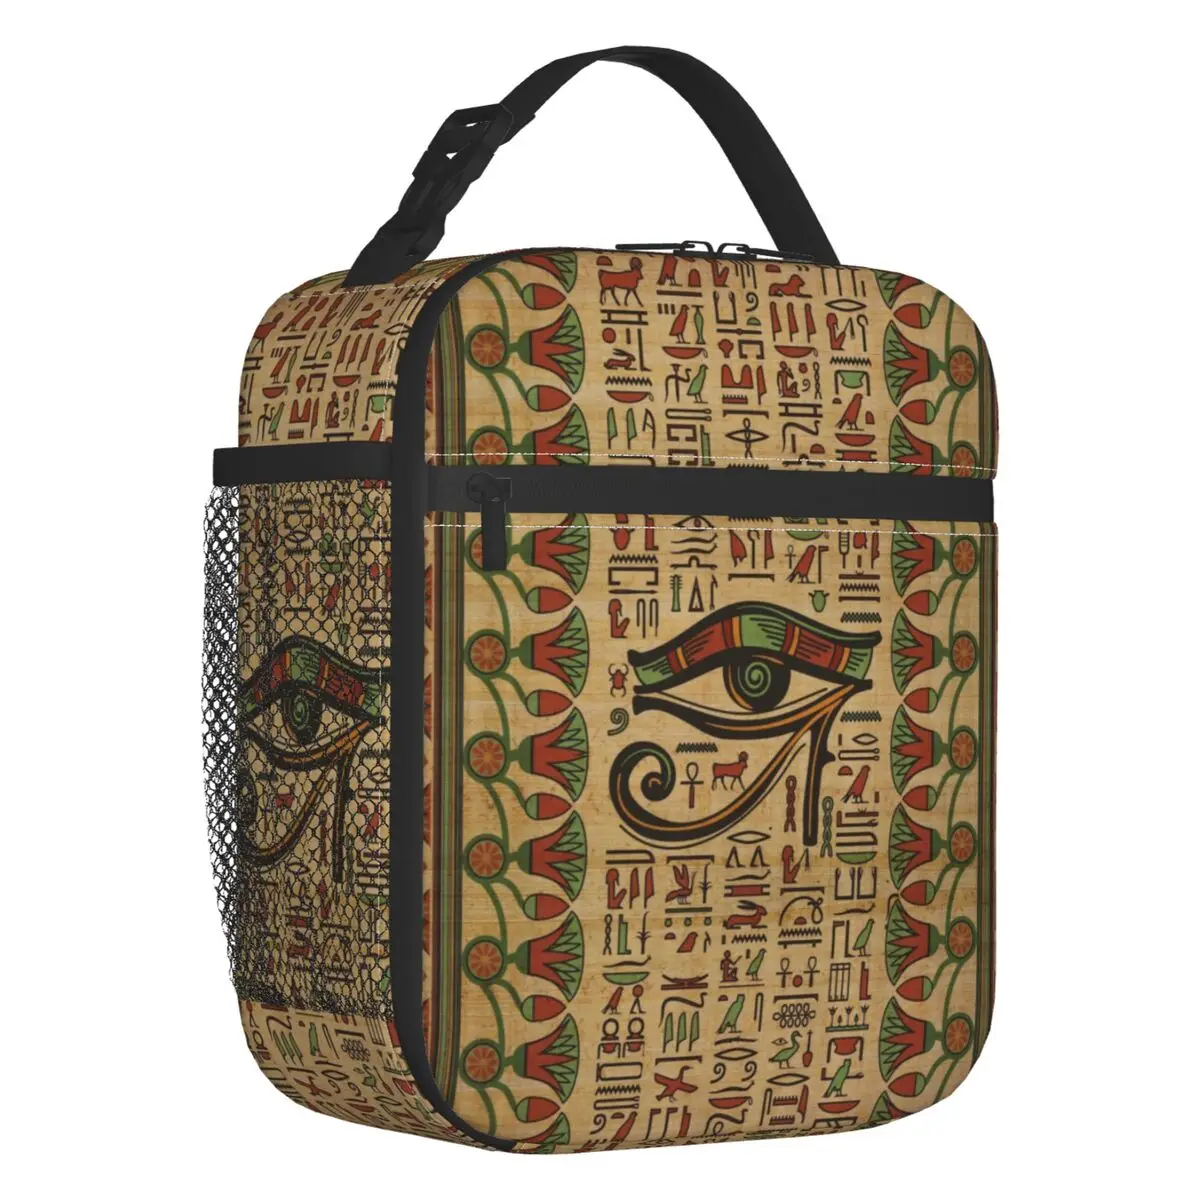 

Egyptian Eye Of Horus Insulated Lunch Tote Bag Ancient Egypt Hieroglyphs Portable Thermal Cooler Bento Box Kids School Children